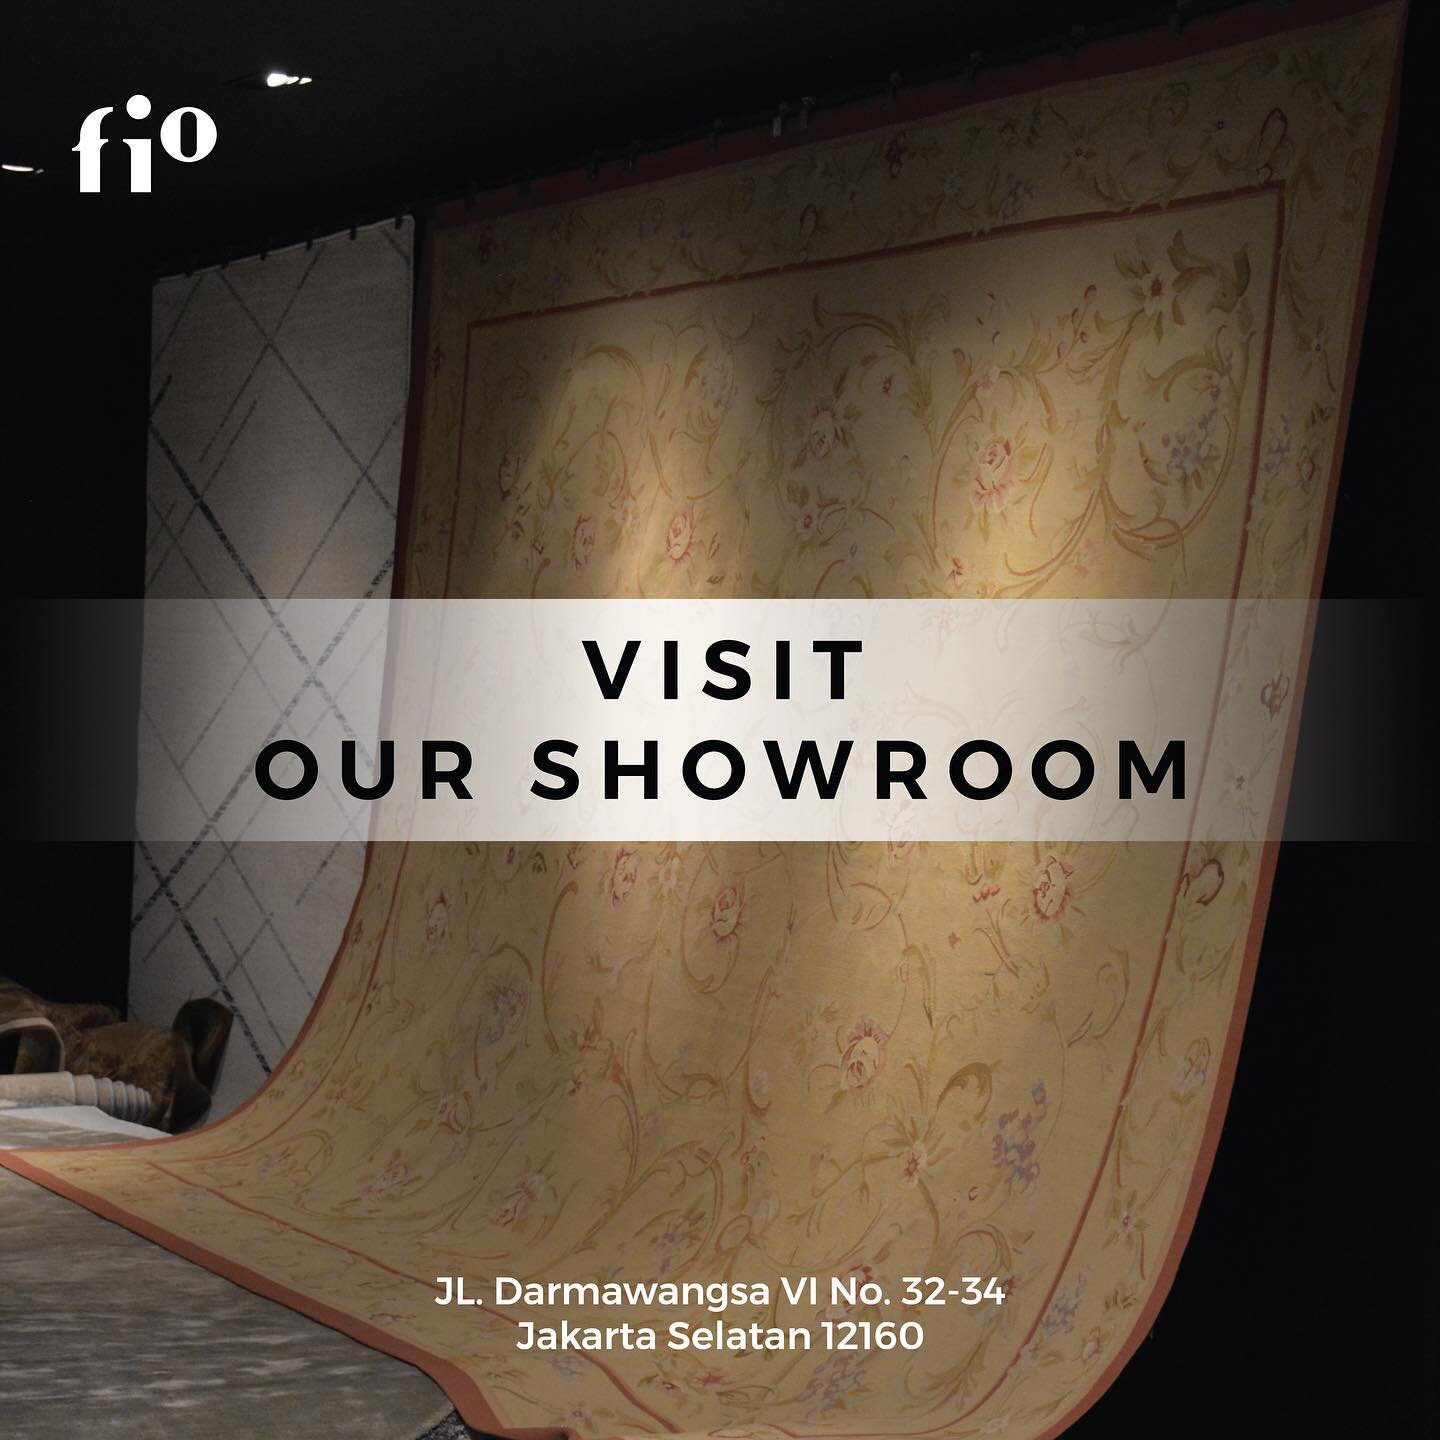 Visit our showroom for the best experience and meet our experts to find the best rugs for you!